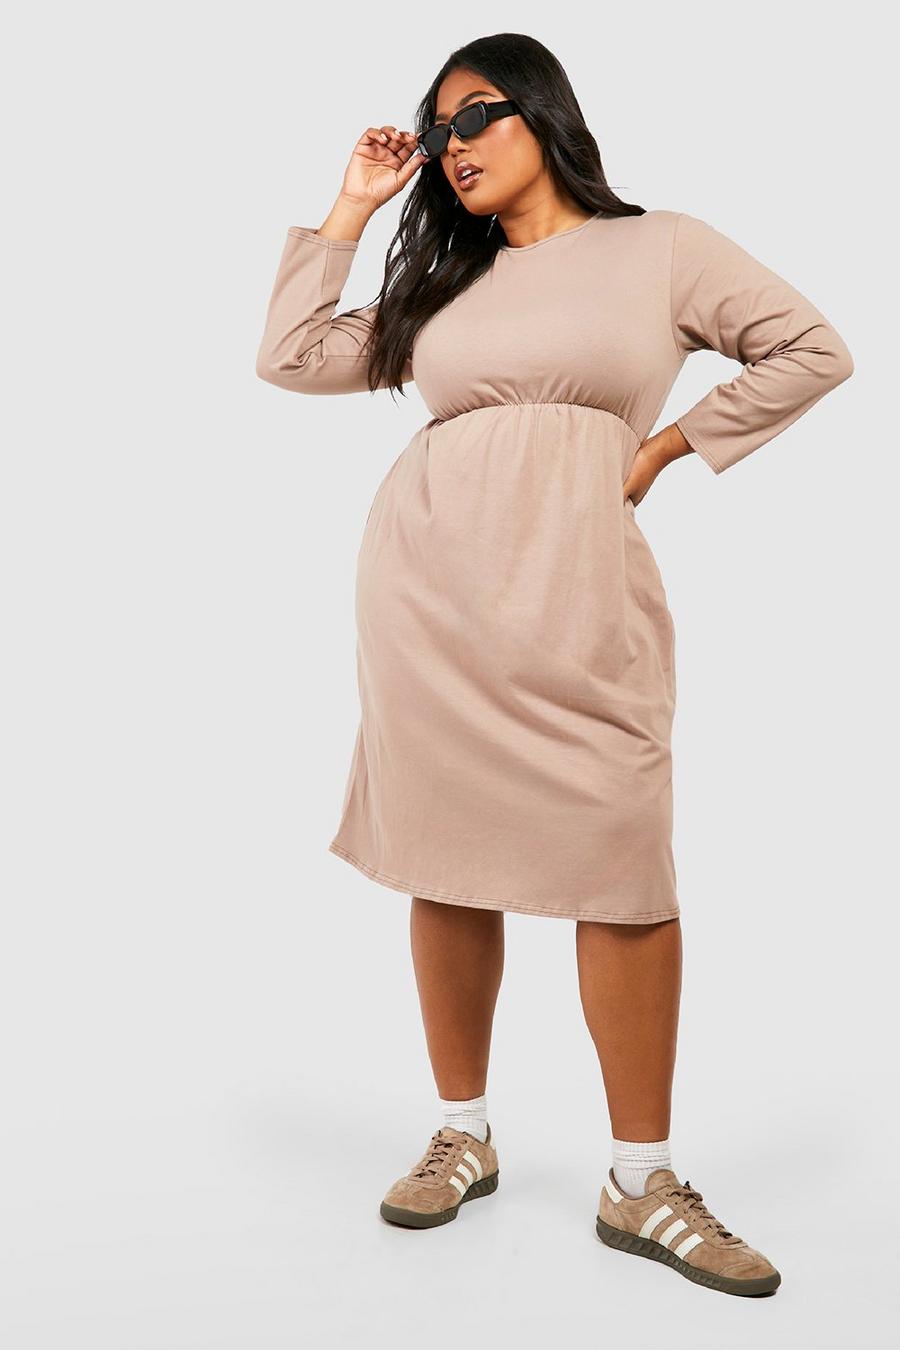 Fashion Look Featuring boohoo Plus Size Tops and boohoo Skinny